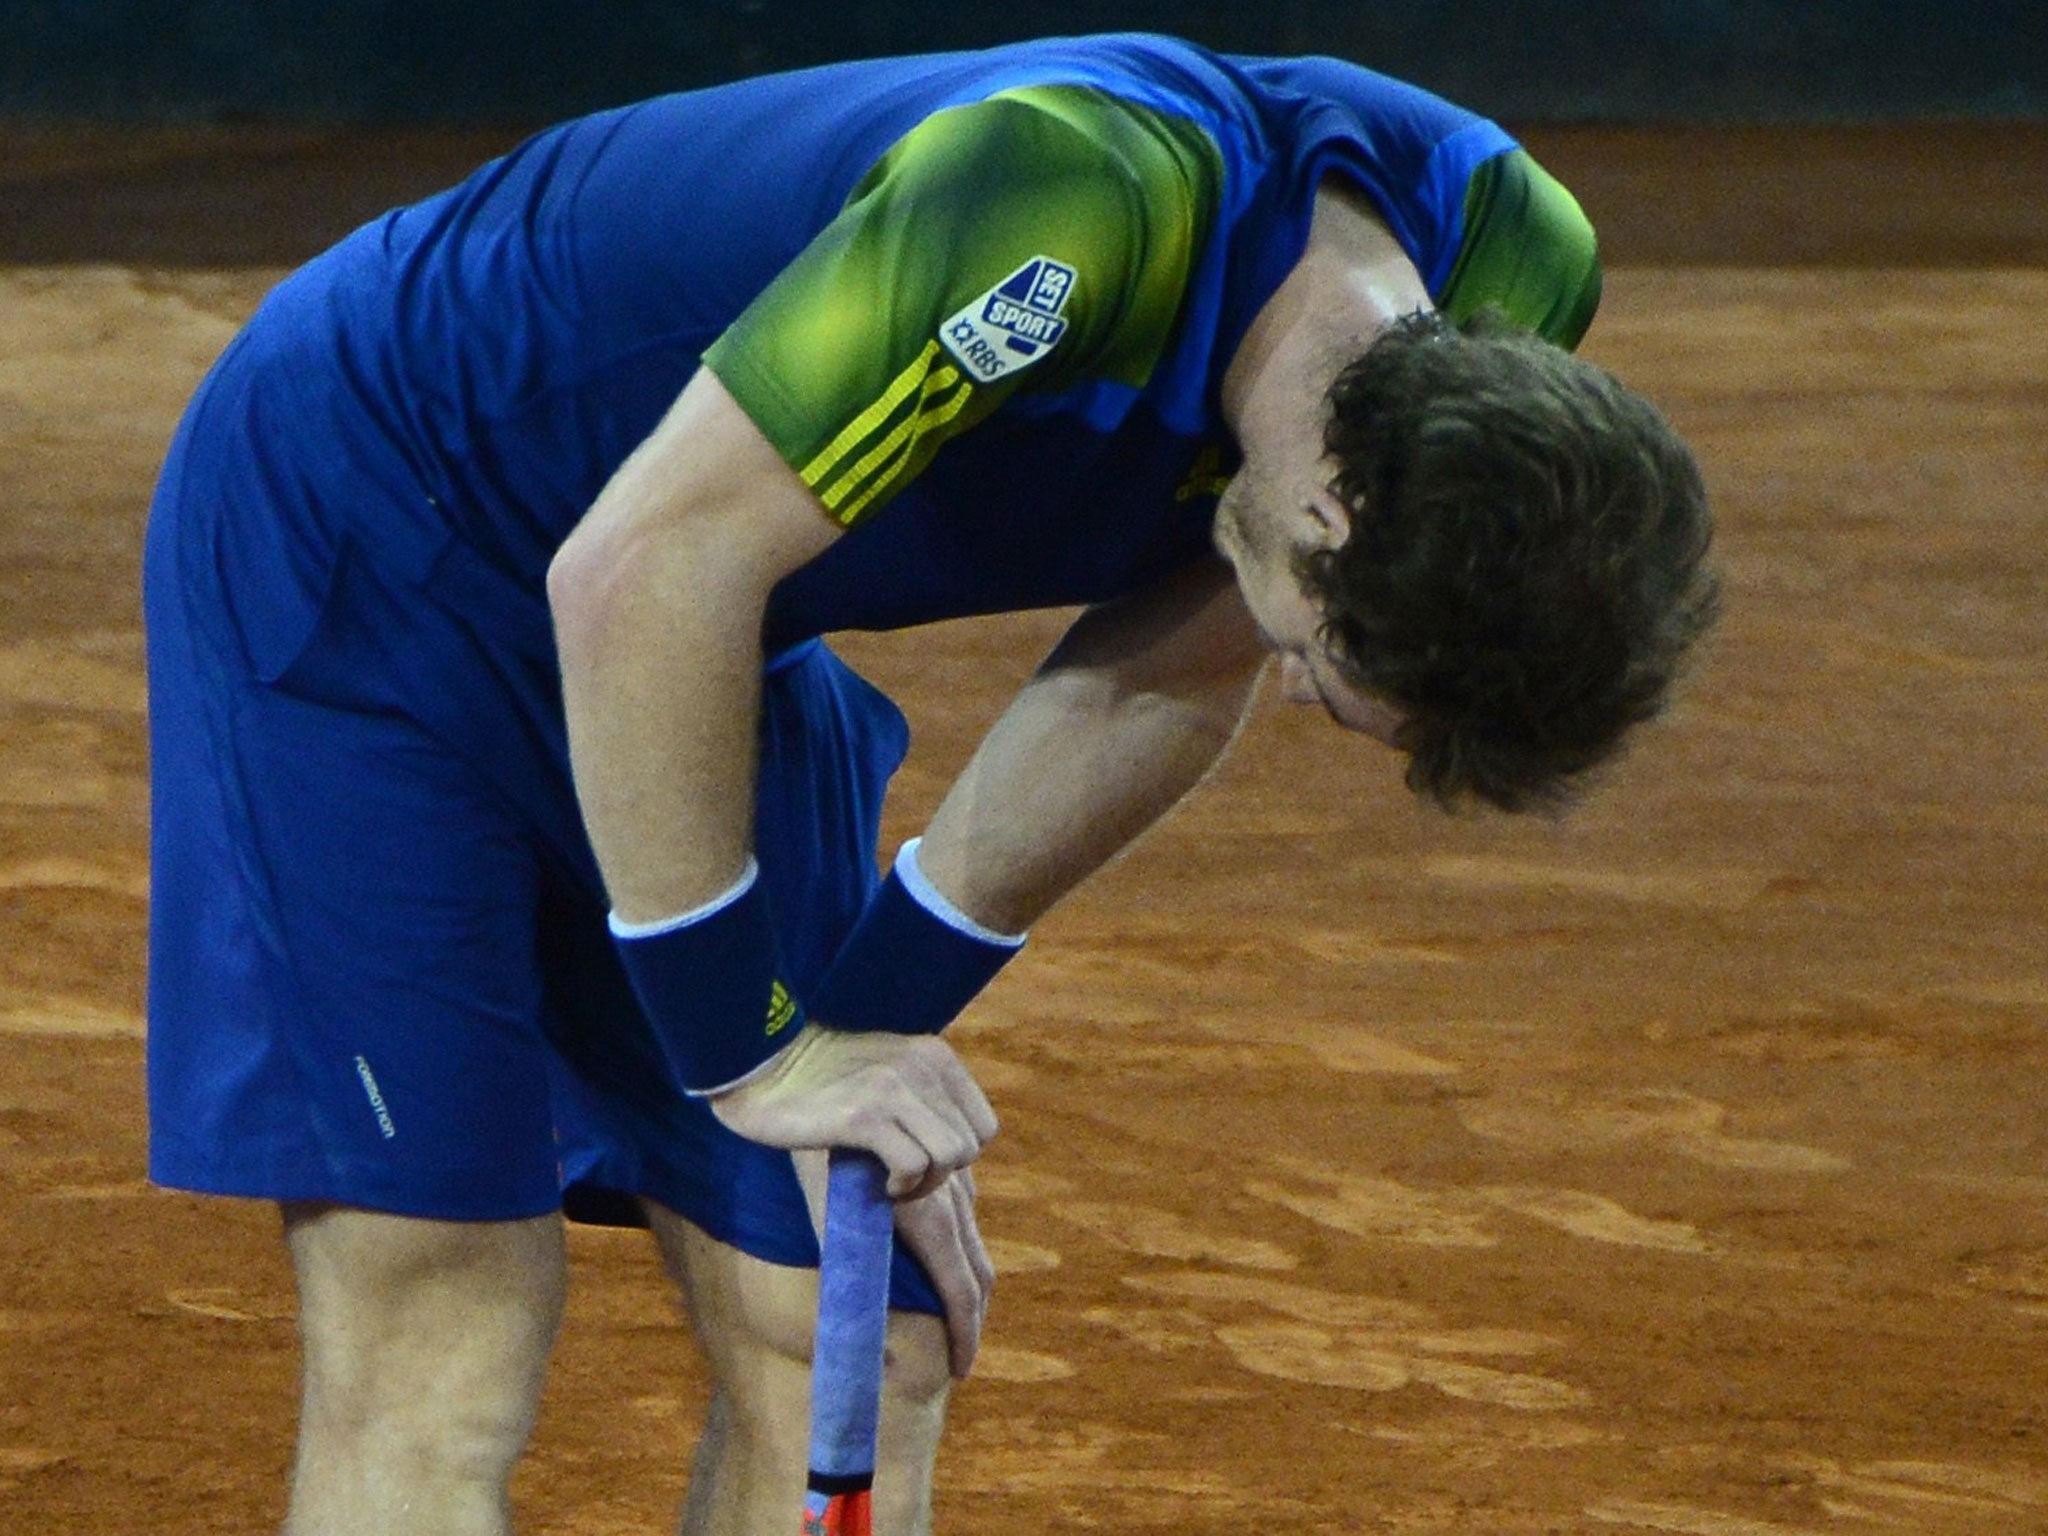 Andy Murray looks defeated during his tennis match against Czech player Tomas Berdych at the Madrid Masters